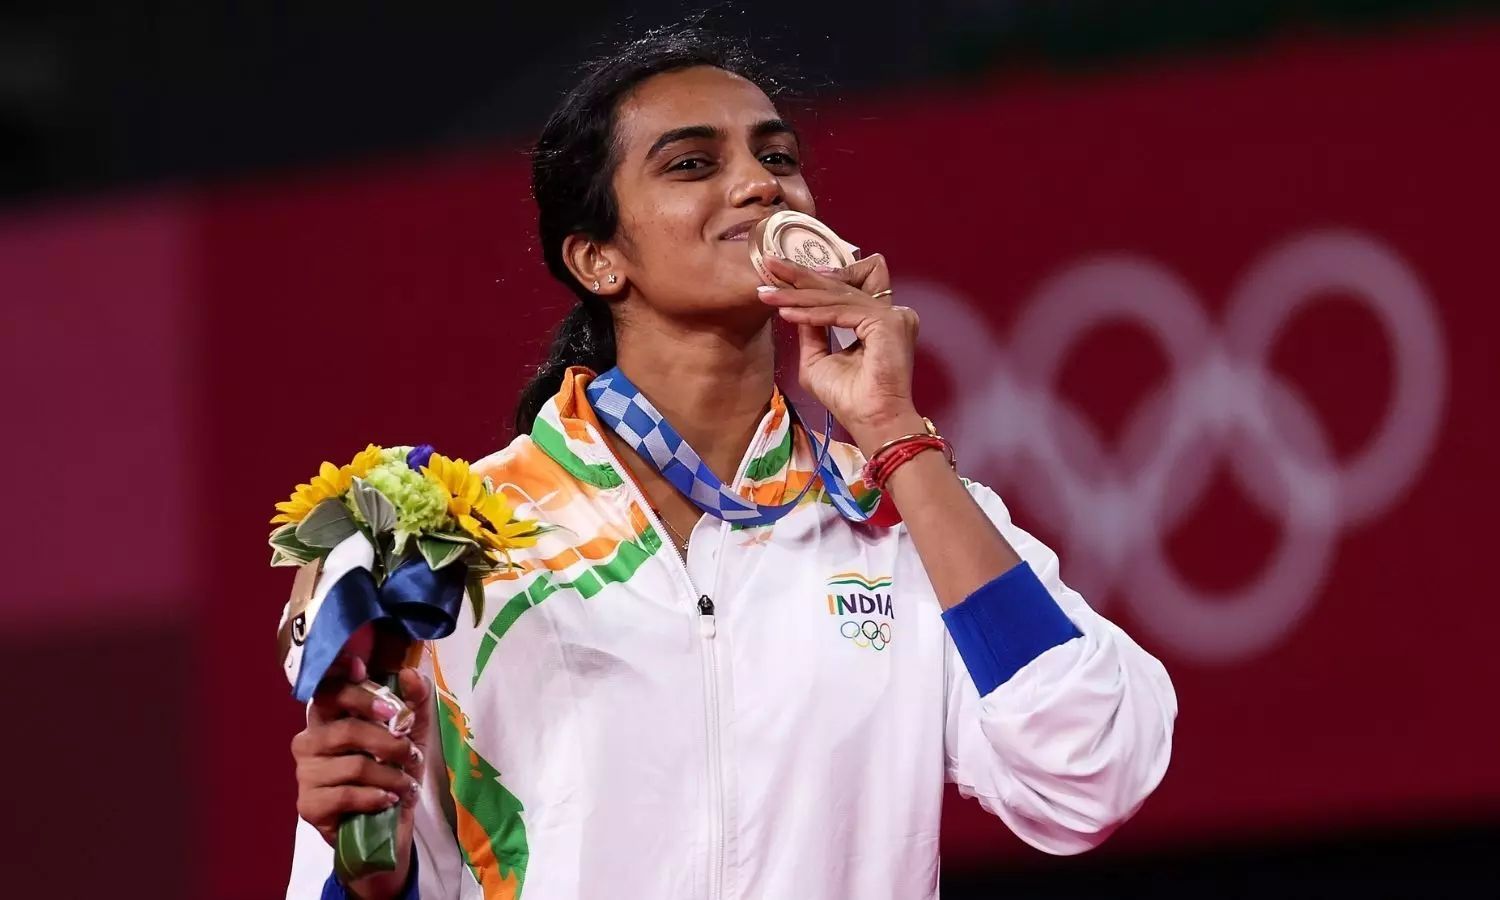 P.V. Sindhu's back-to-back medals in the Olympics